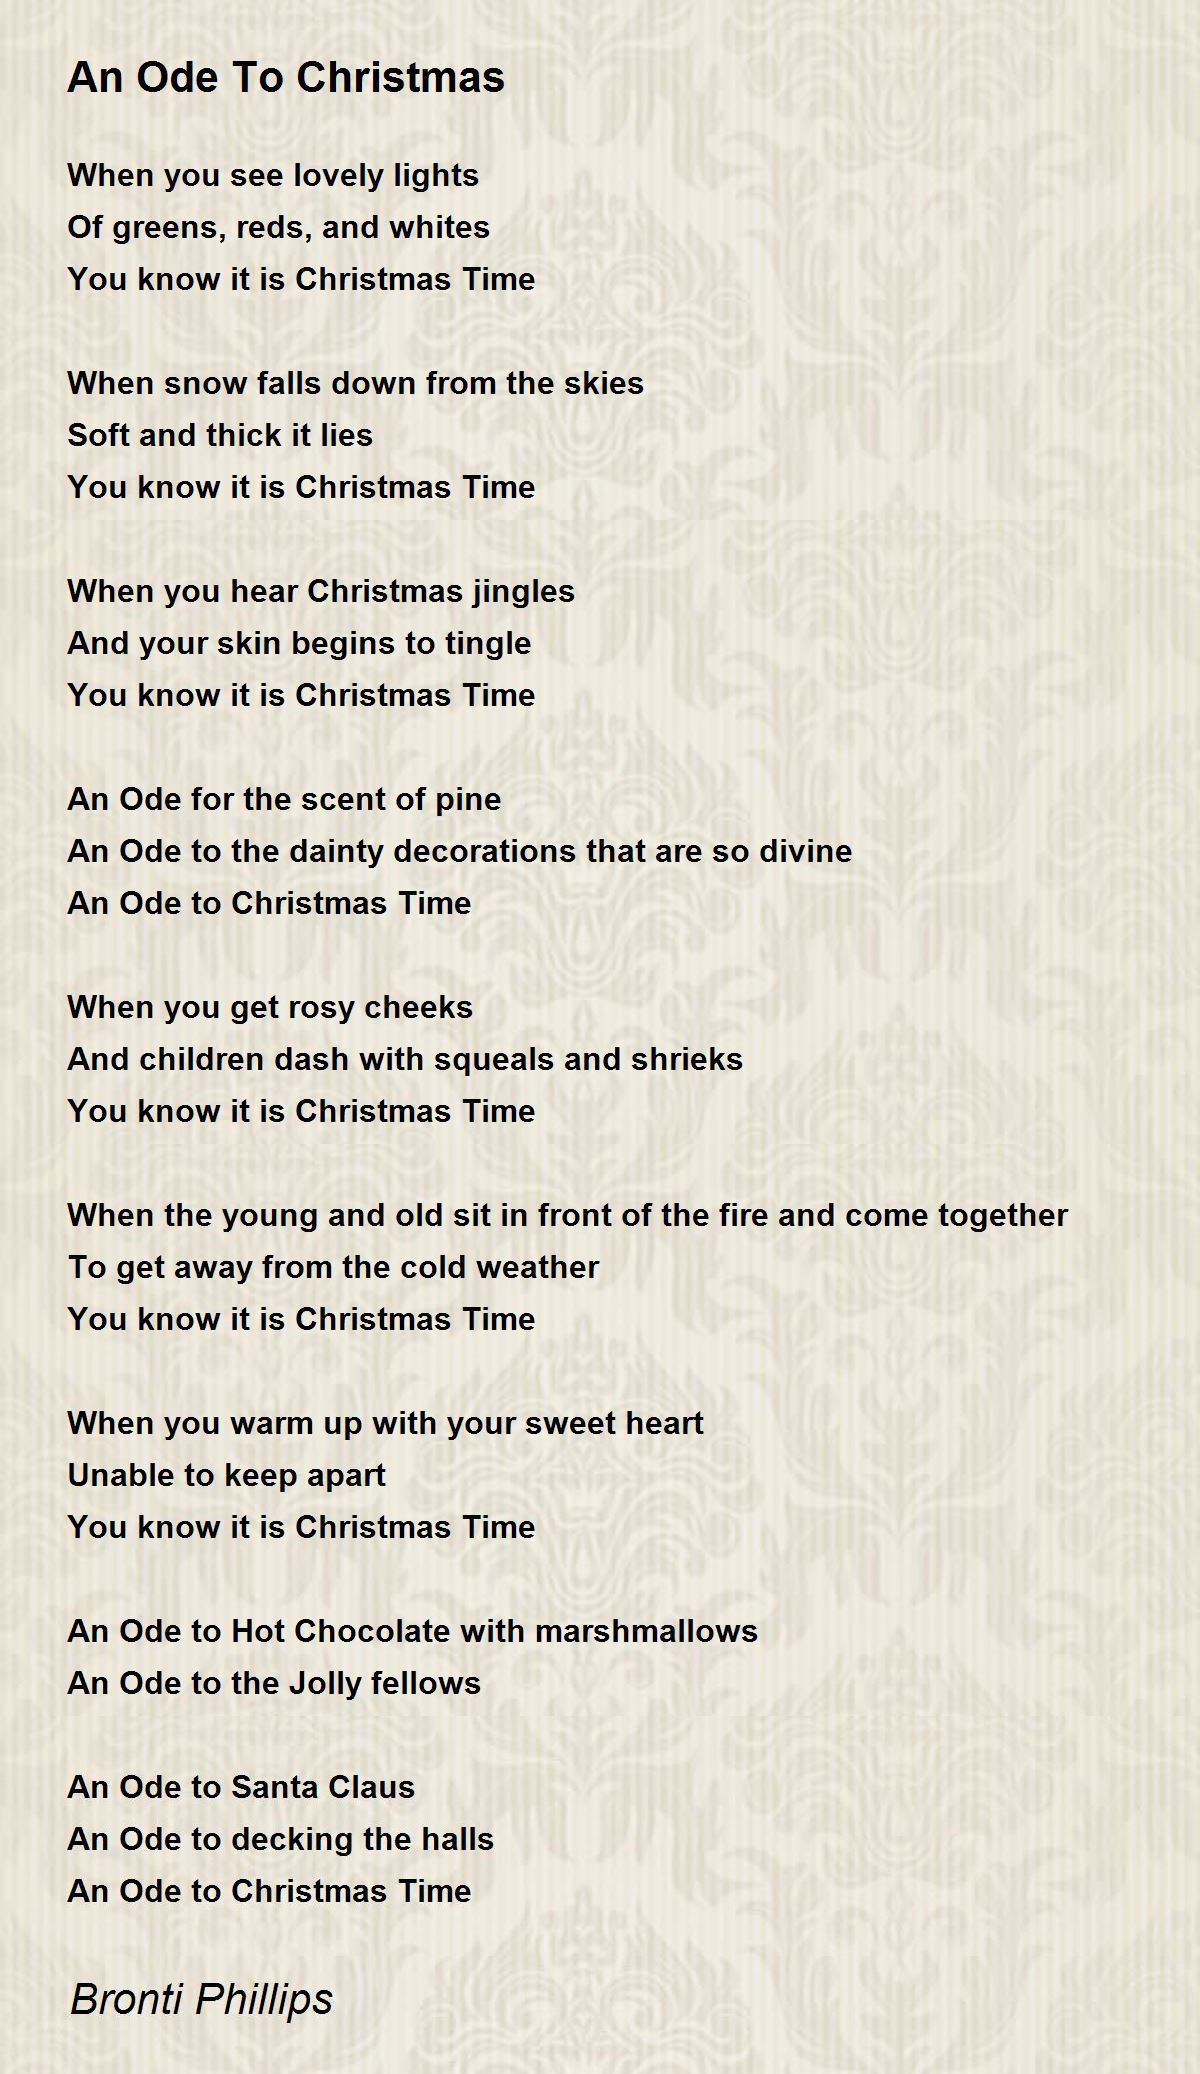 An Ode To Christmas by Bronti Phillips An Ode To Christmas Poem